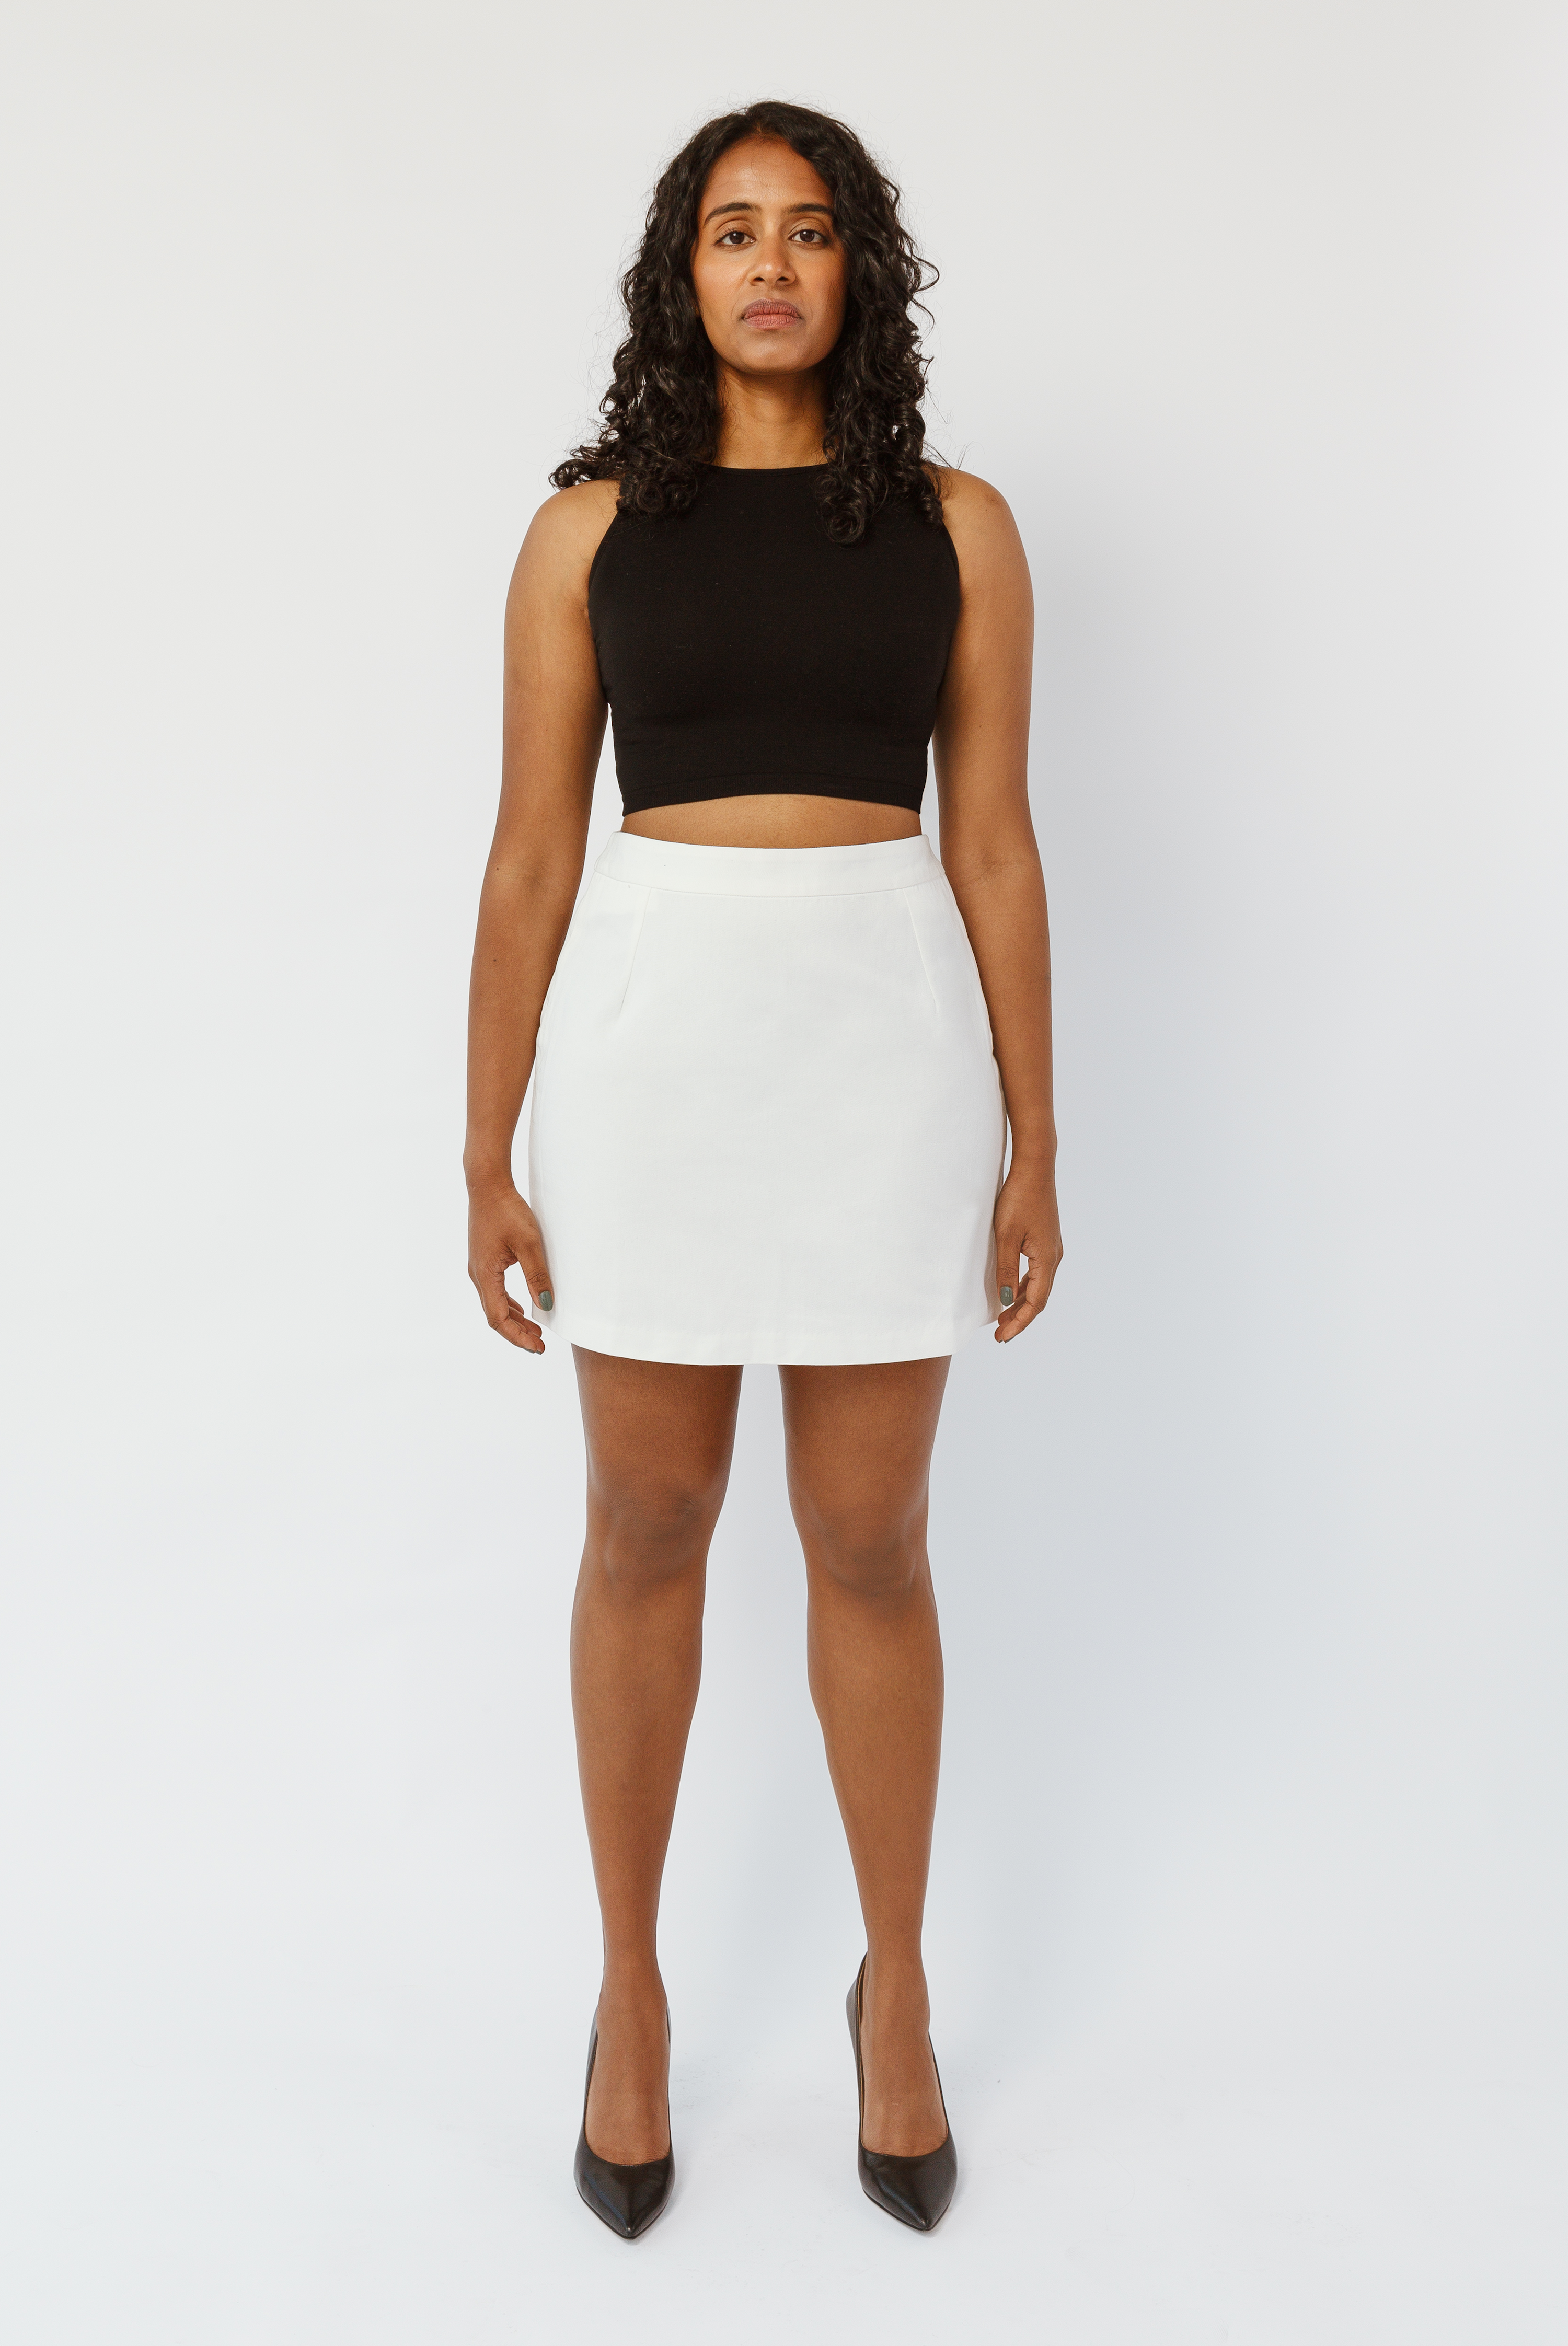 The Mini Skirt by Aam is designed for women with full hips and thighs. It's sit snug at the high waist with roomy fit through the seat for curvy bottom shapes. This image shows the front view of The Mini Skirt in white. It is shown on a model who is 5’7” and wearing a size Small. The skirt has been transparency tested across skin tones and is opaque.